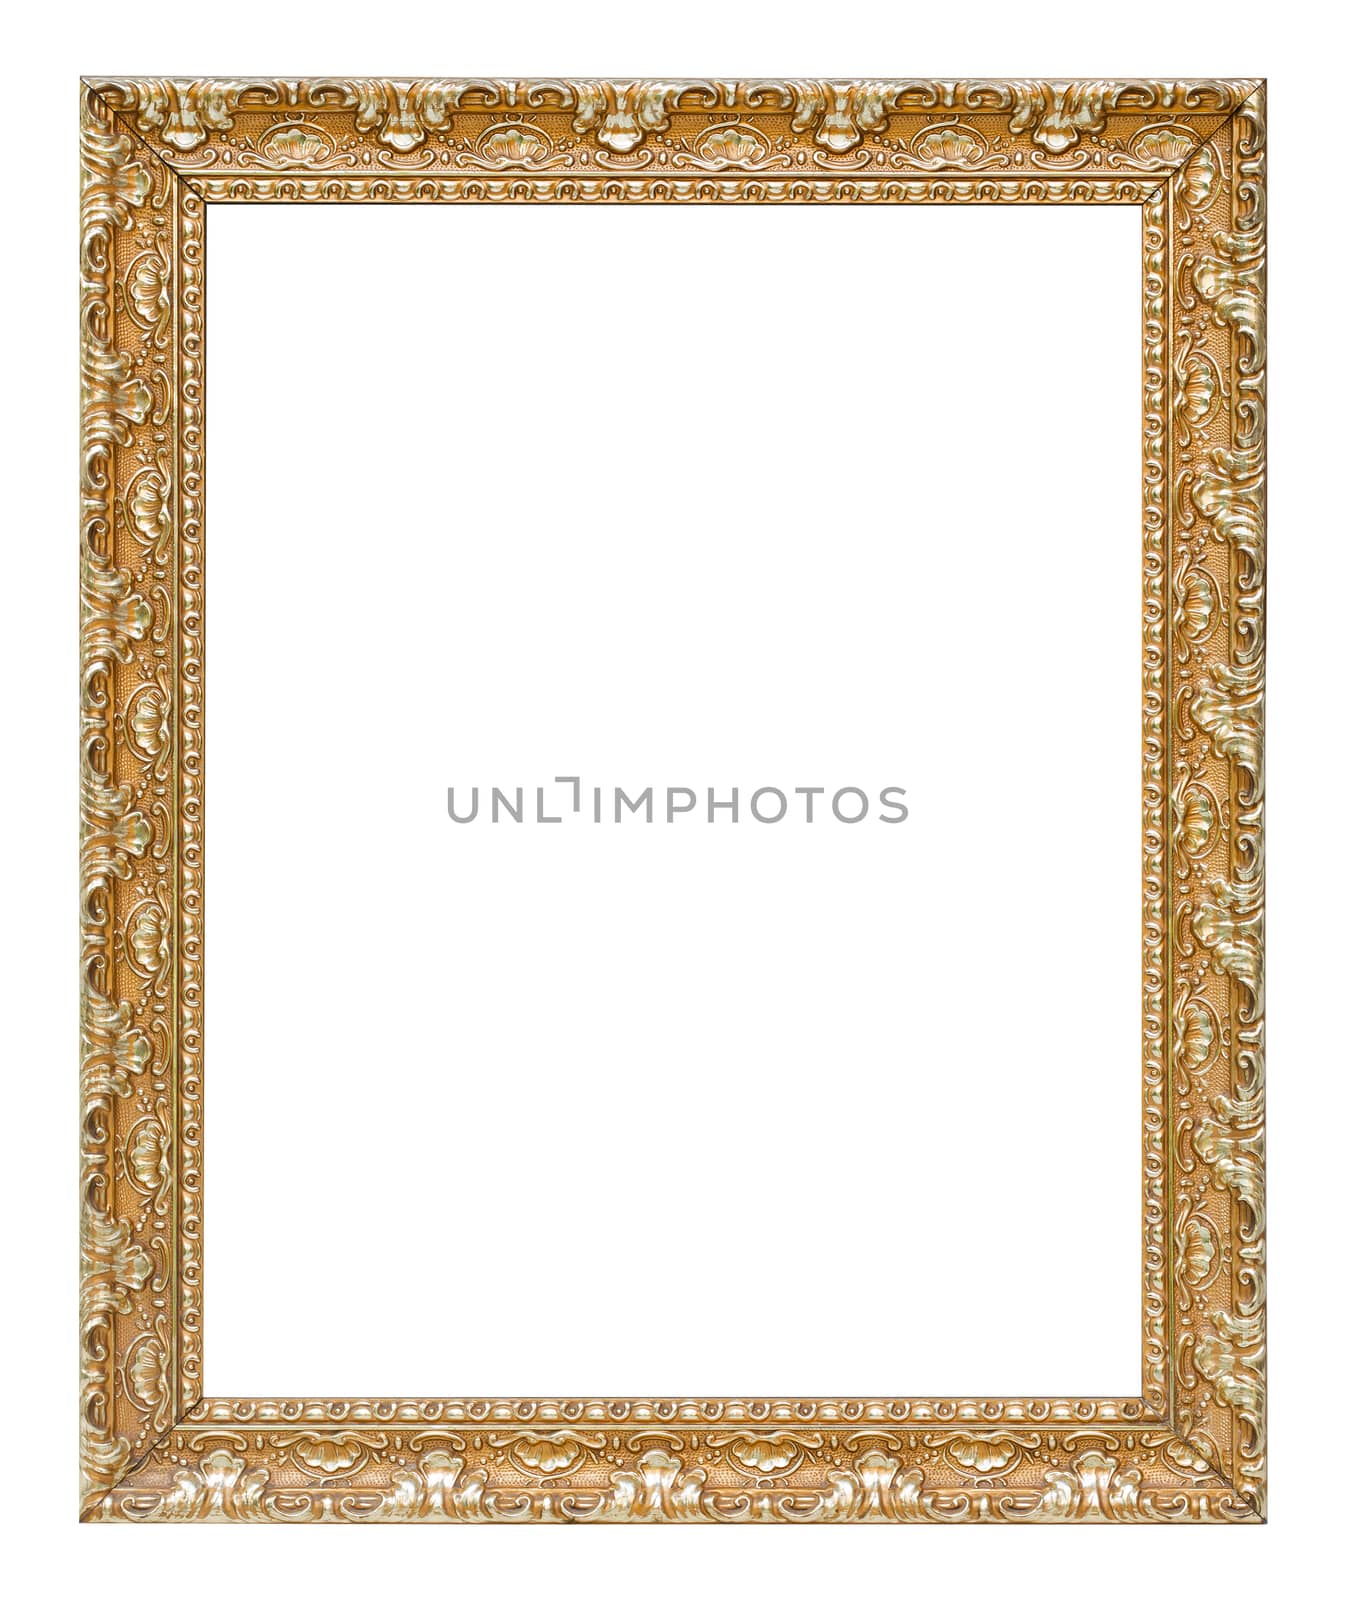 The antique gold vintage frame luxury premium isolated white bac by jayzynism